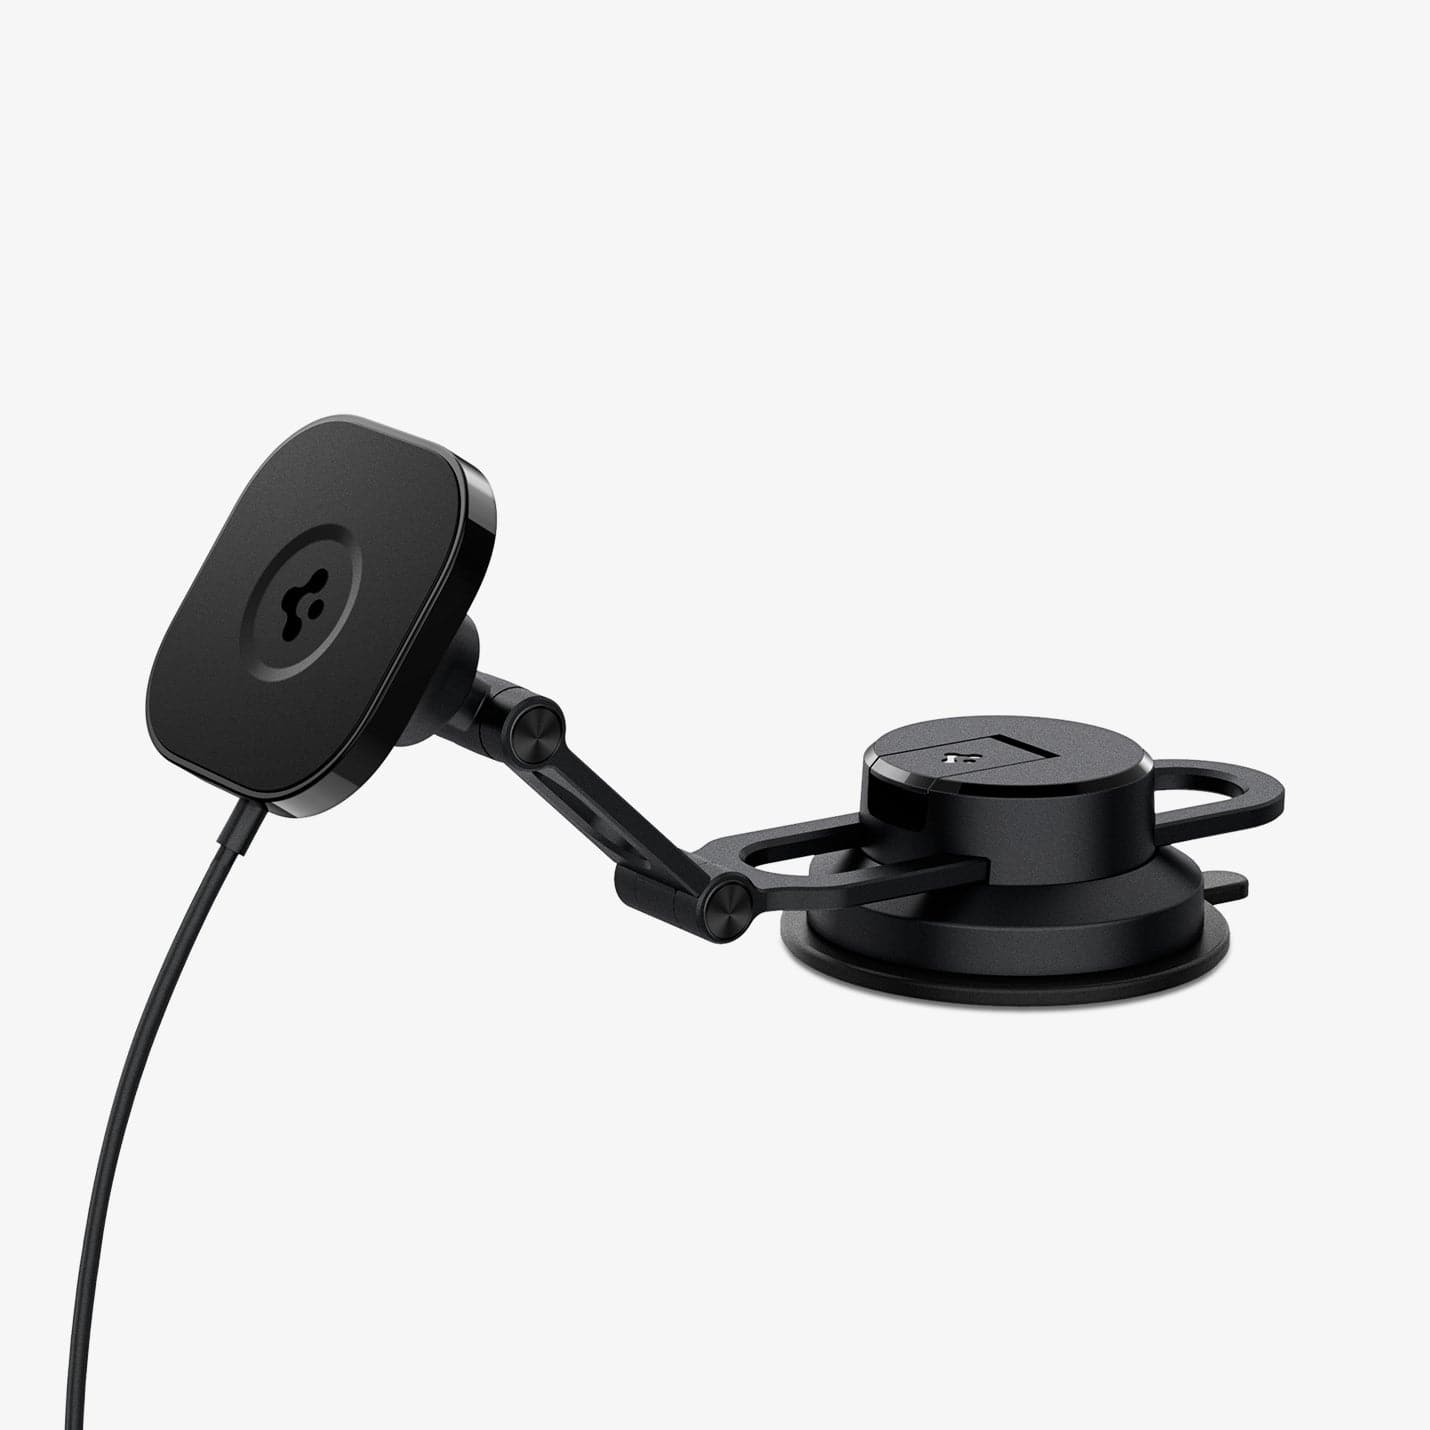 ACP04629 - OneTap Pro 3 Black Dash Magnetic Car Mount (MagFit) in black showing the front and side